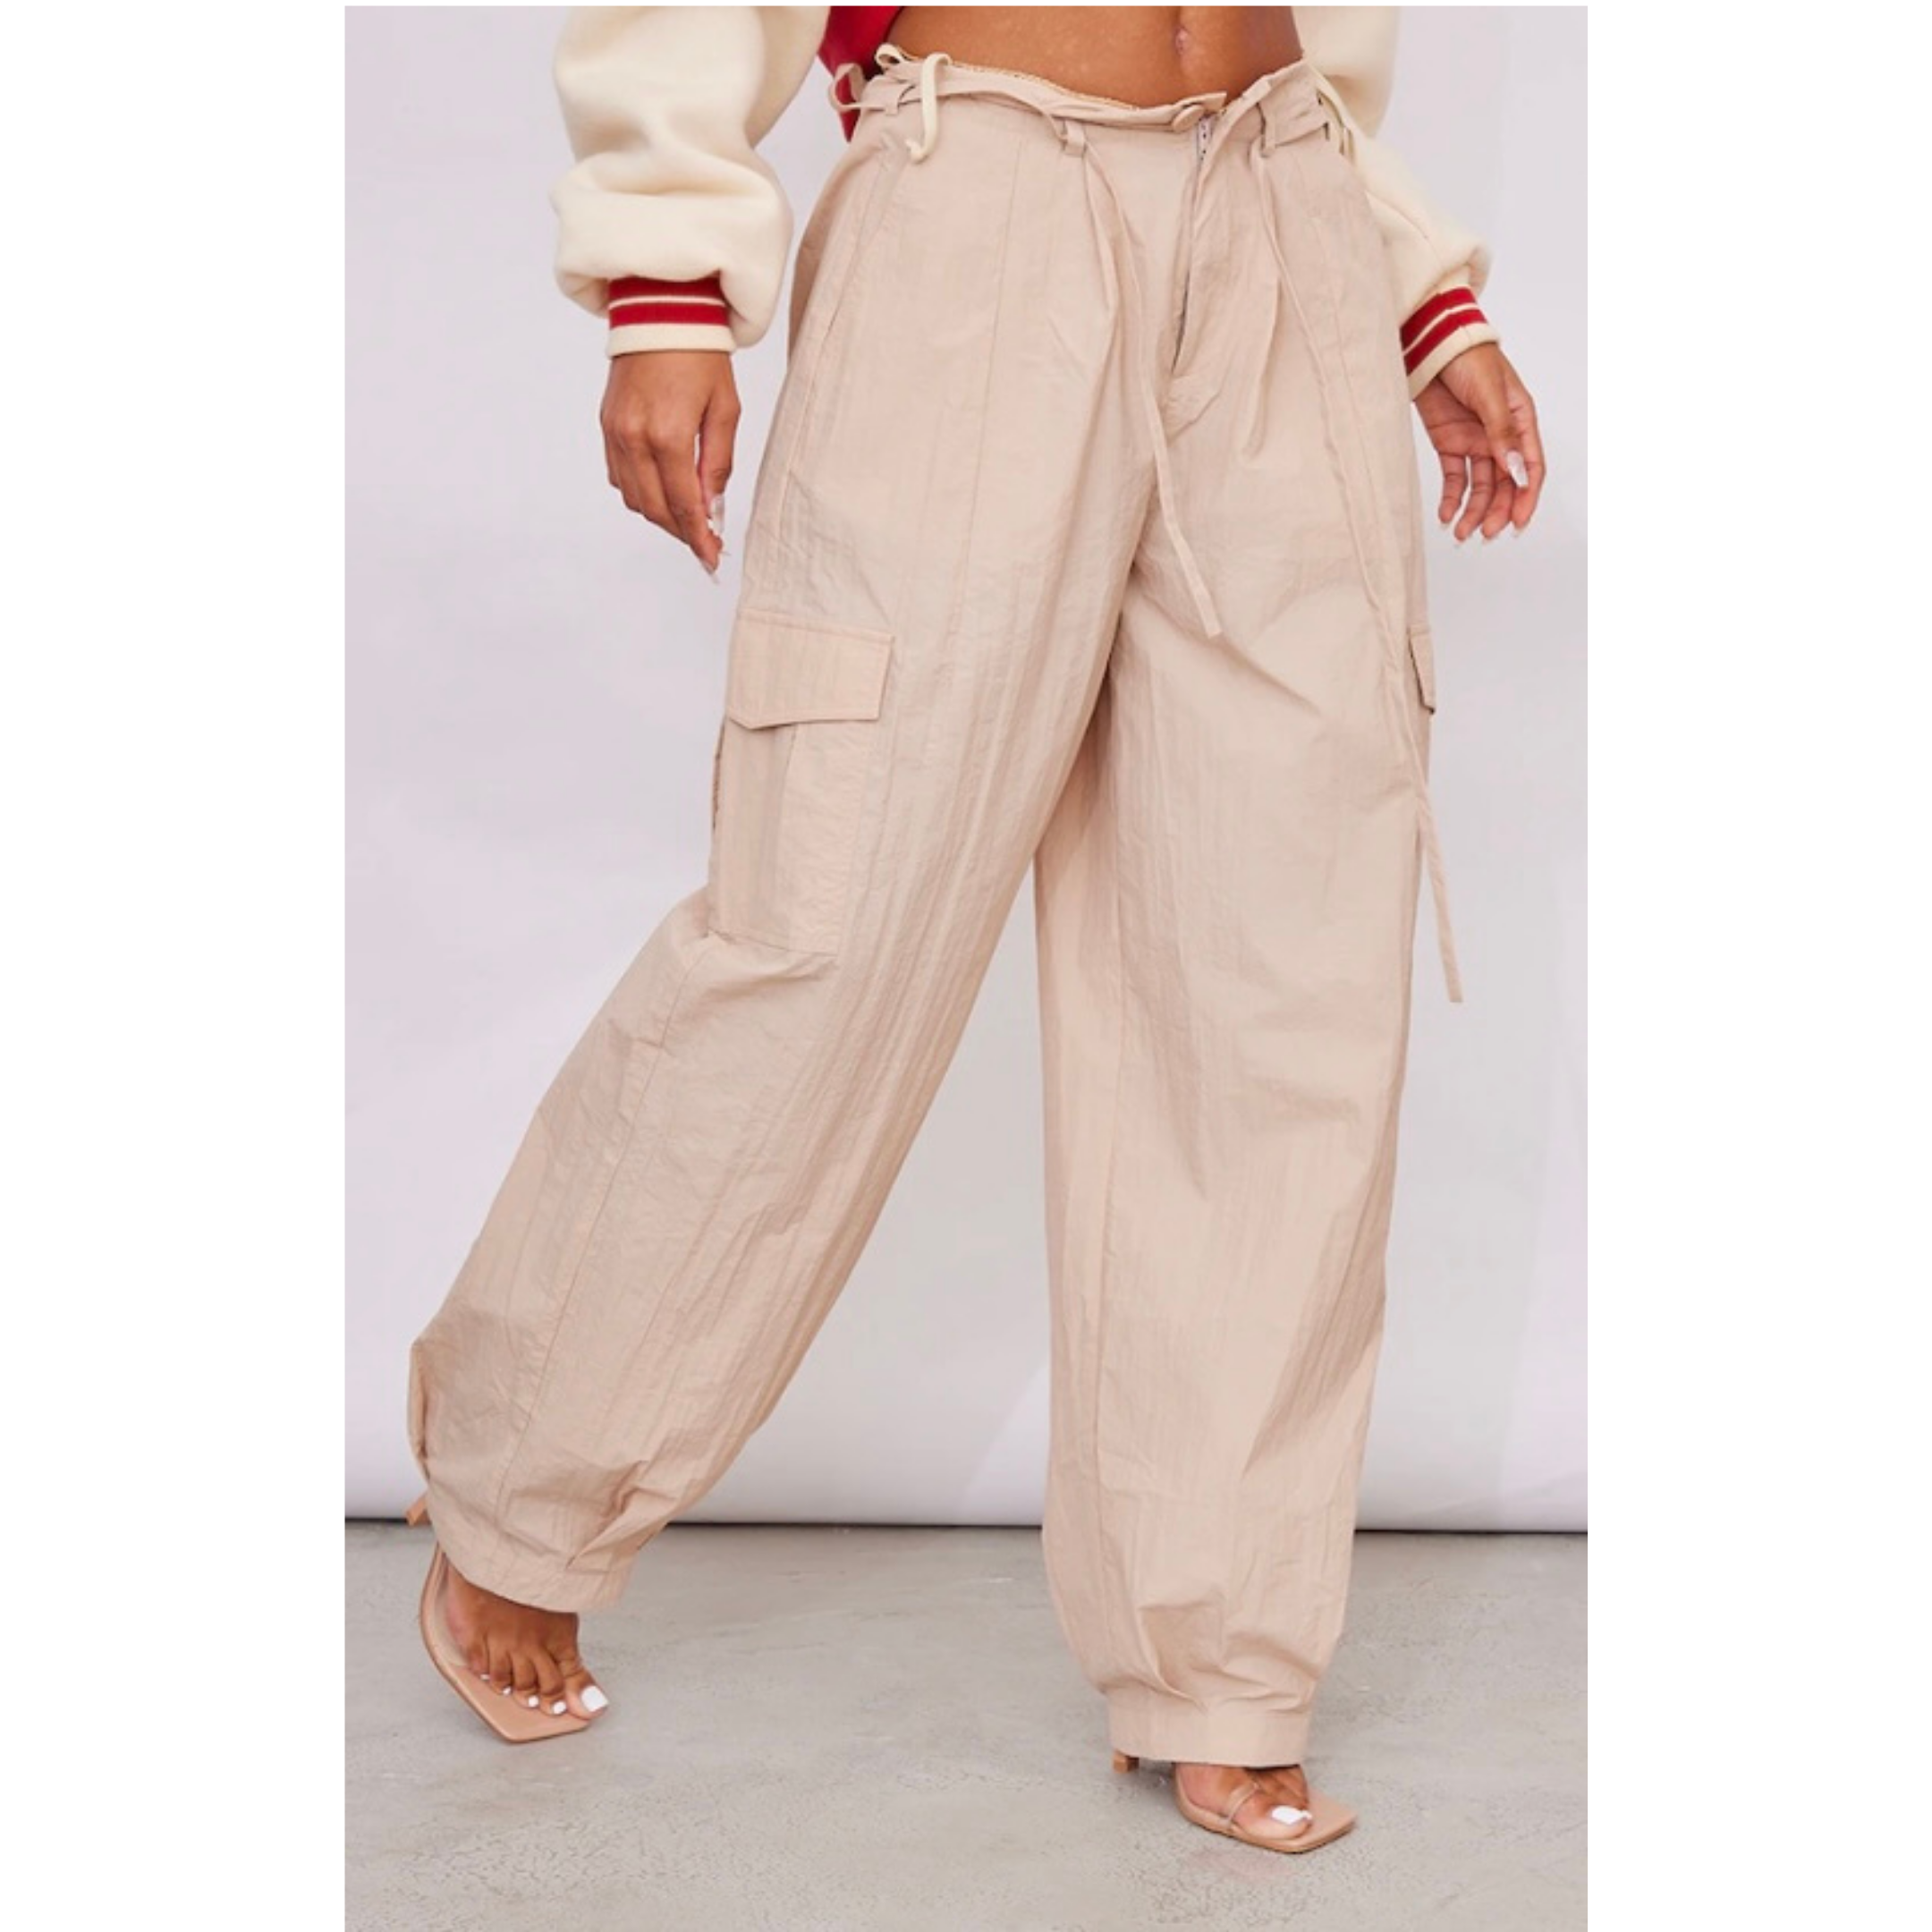 Parachute Pants Are The Cozy Cute Pants Trend Taking Over | Essence